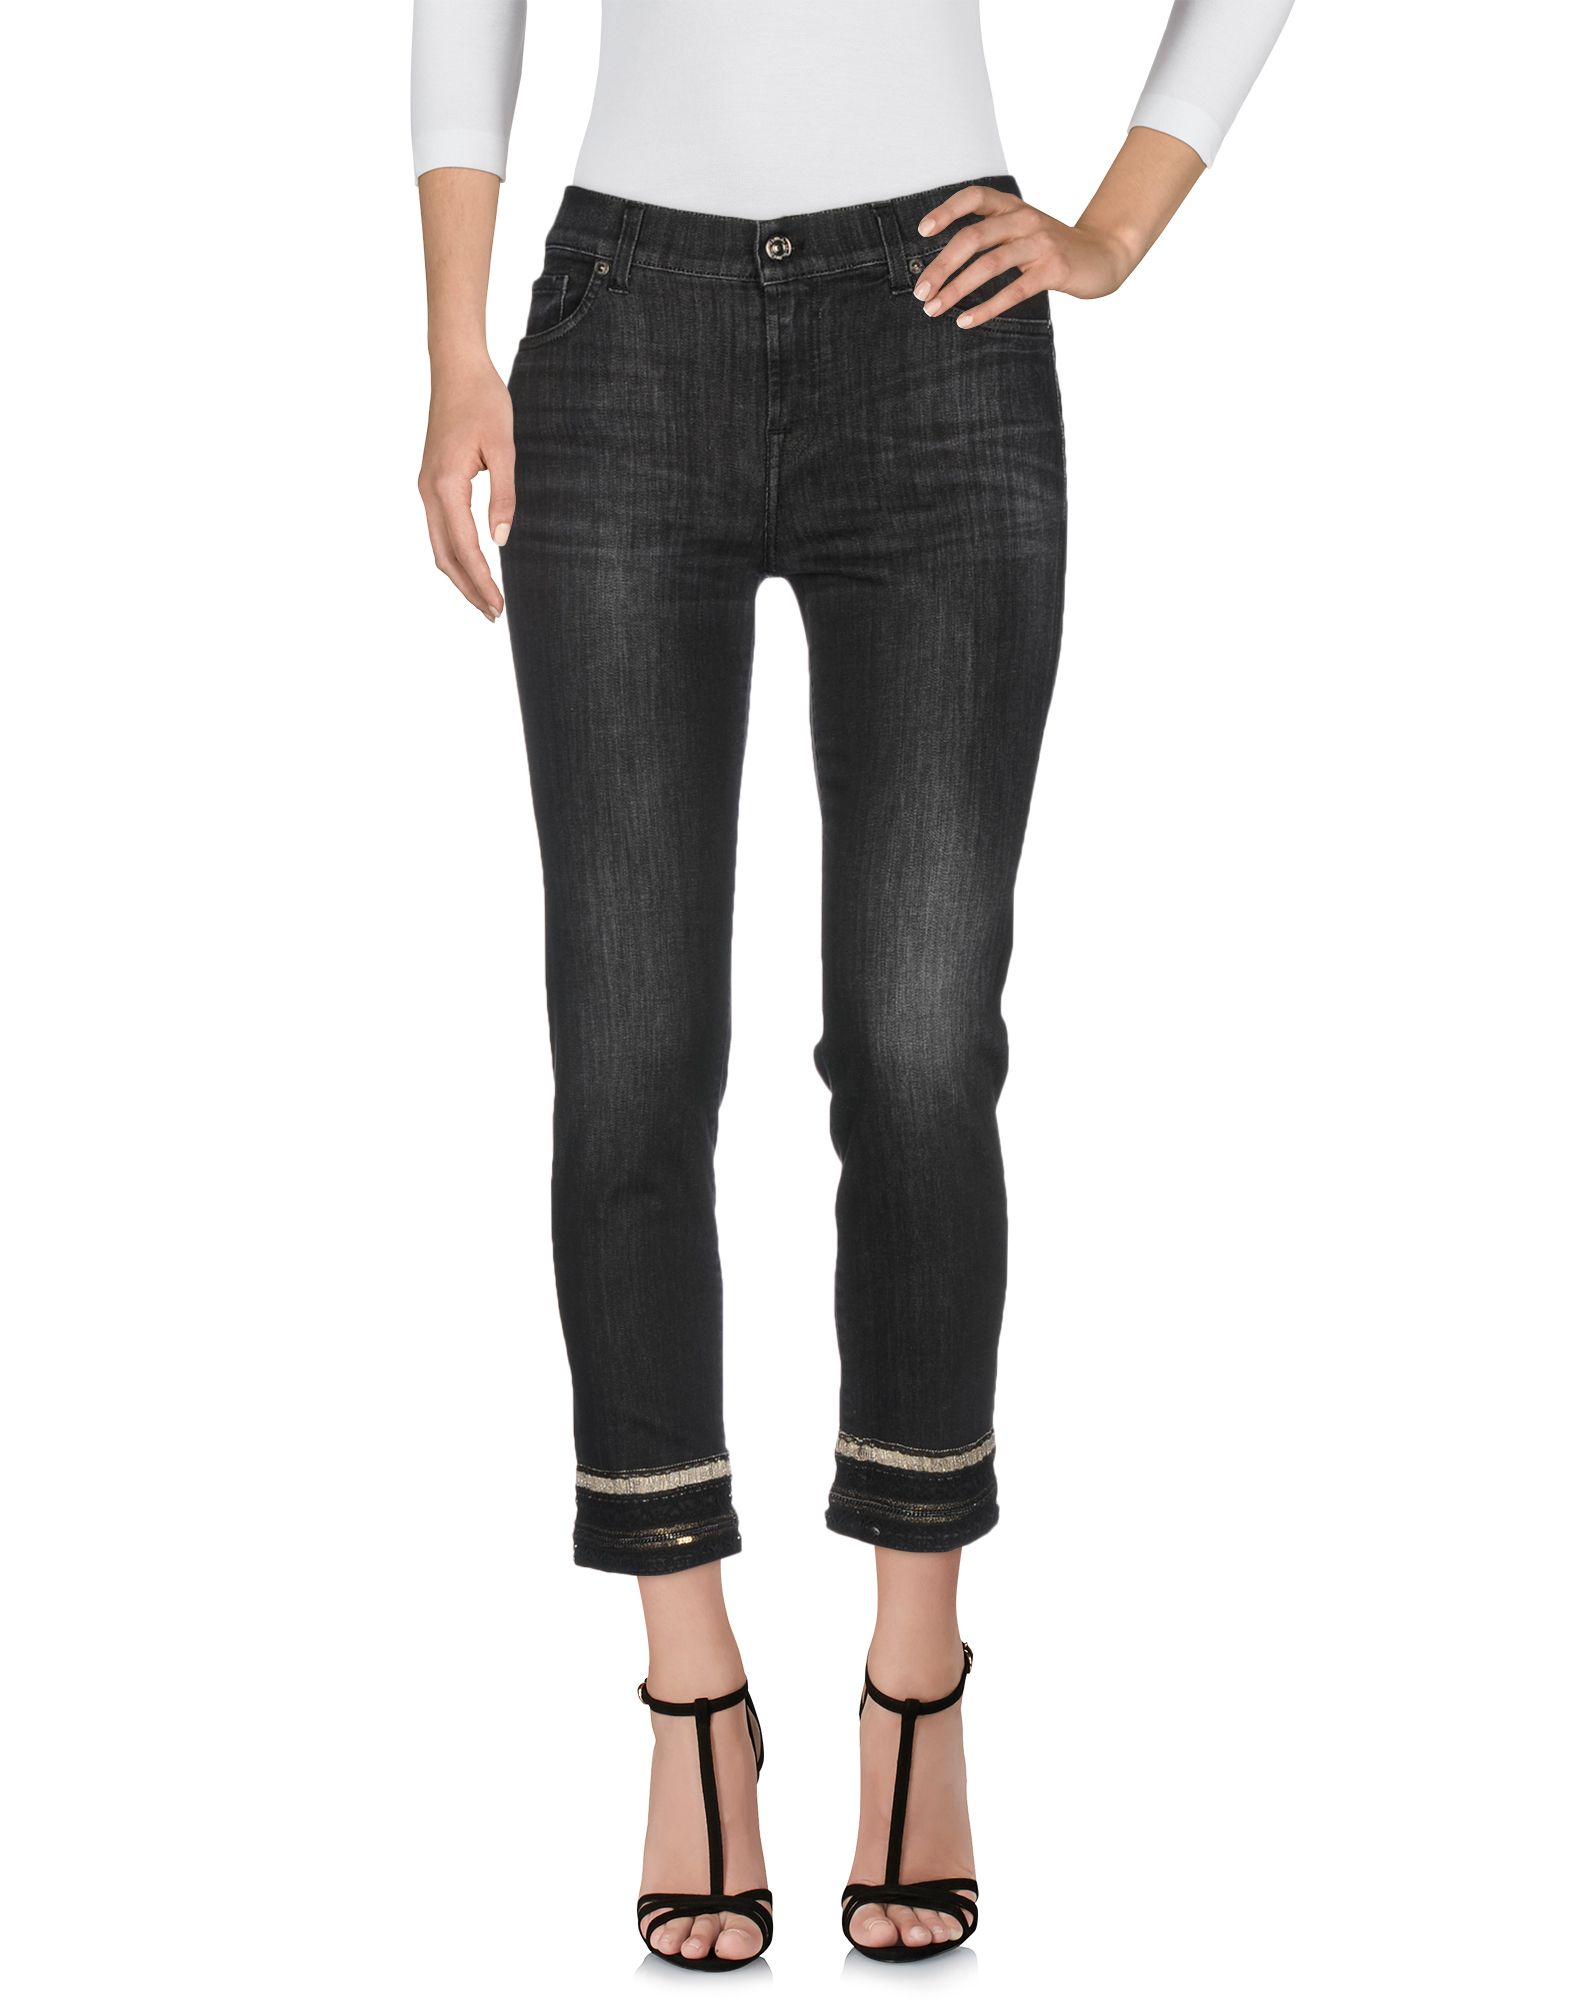 7 FOR ALL MANKIND Denim pants,42672431WK 1